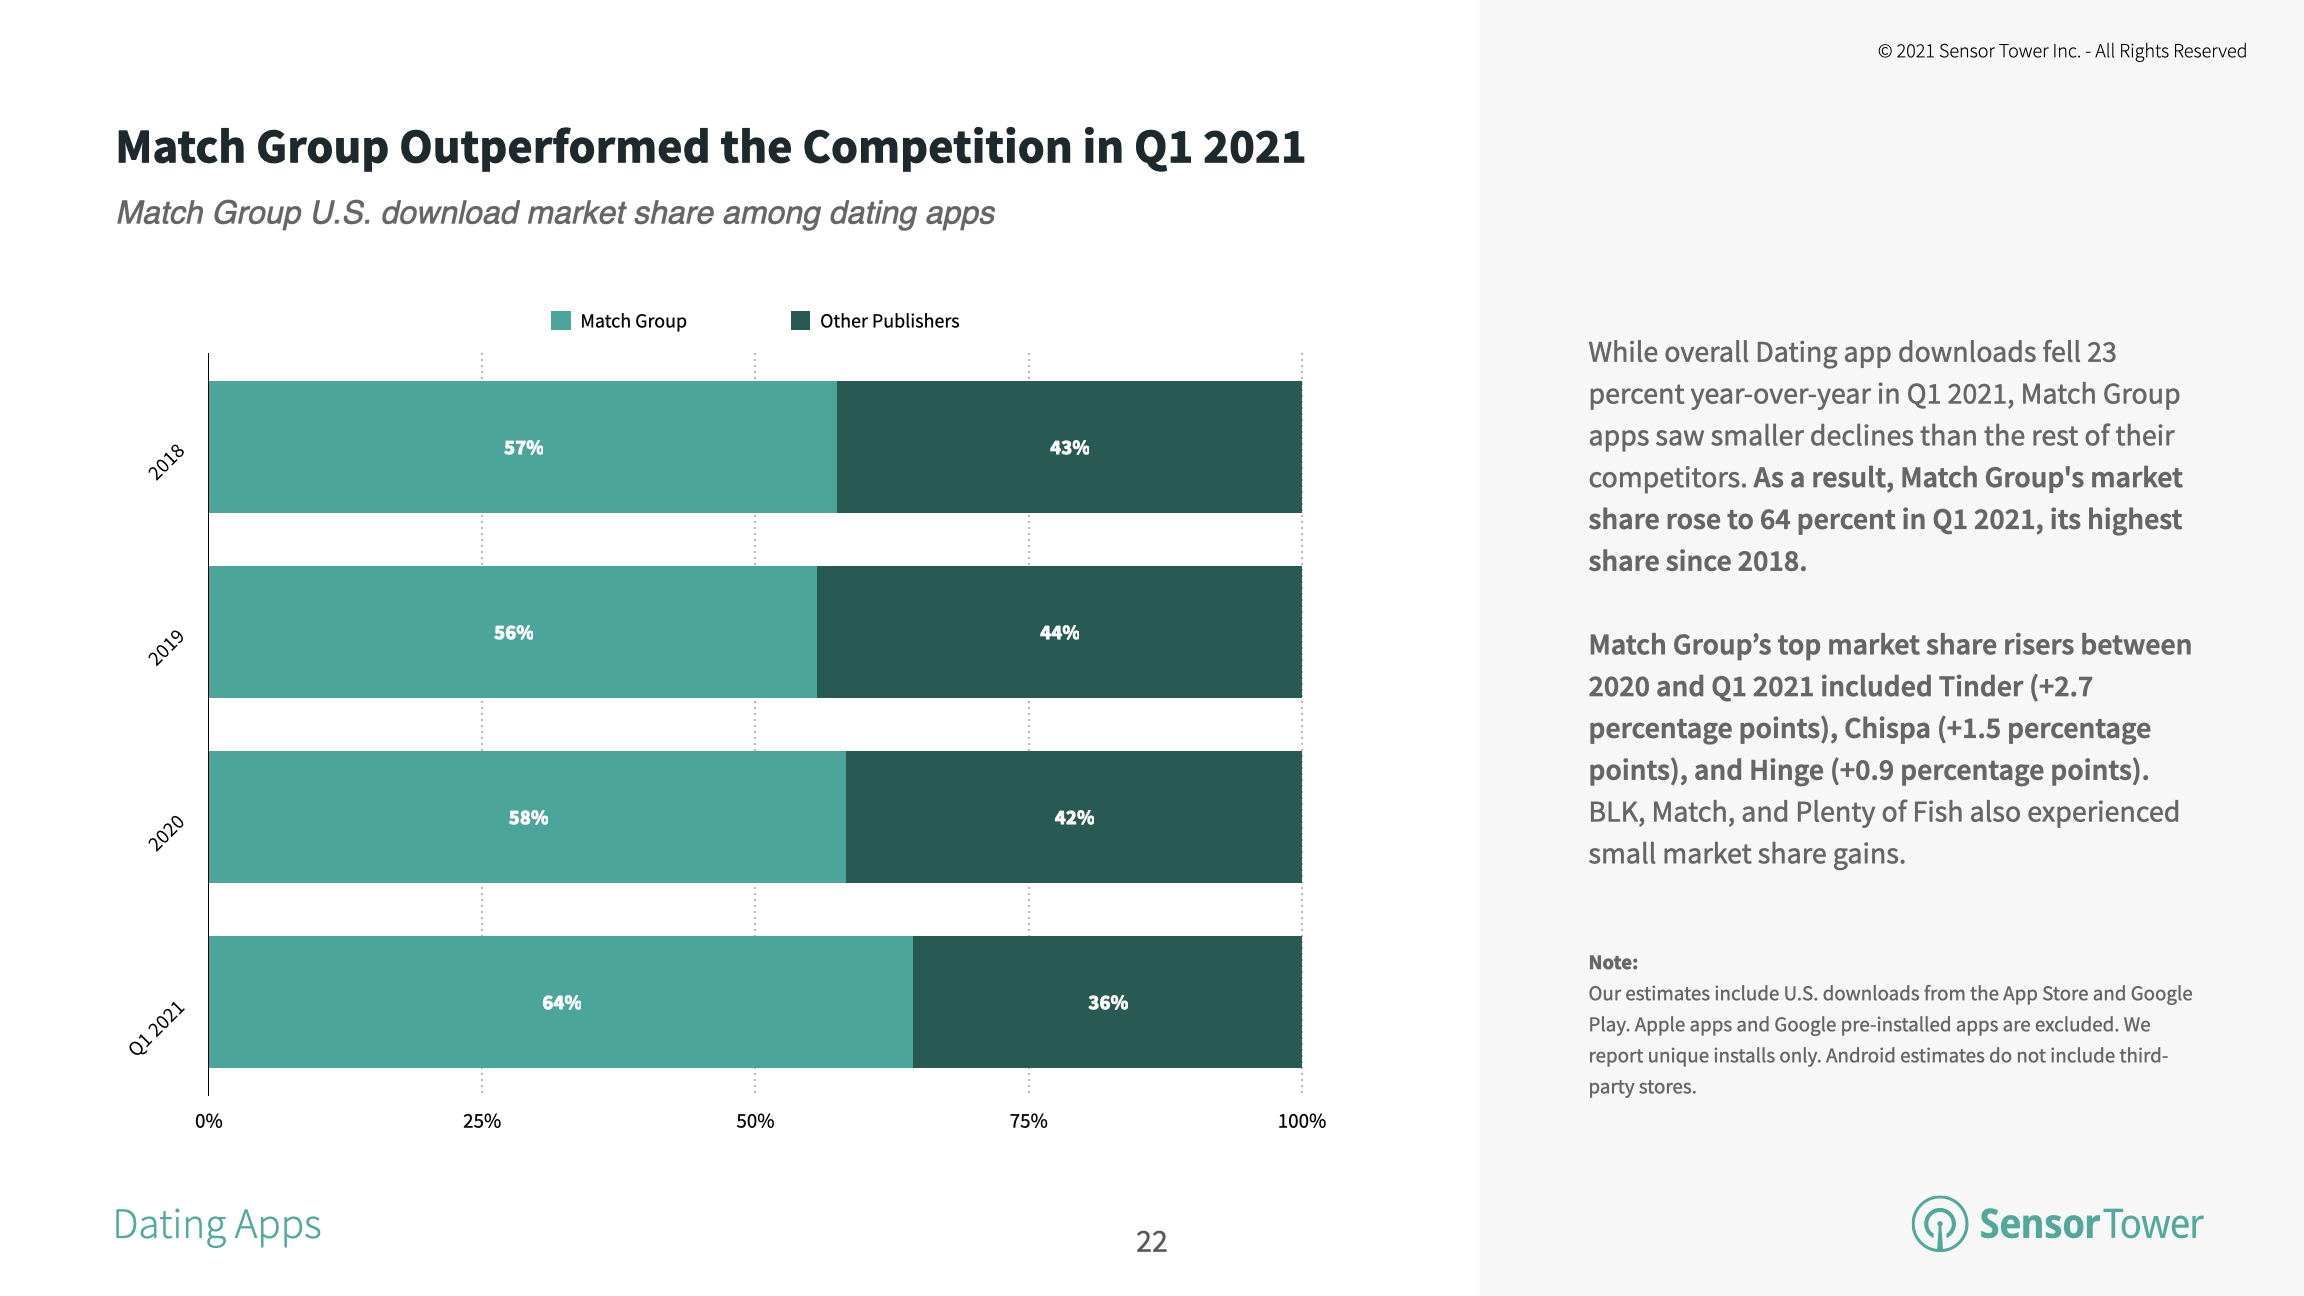 Match Group apps continue to outperform competitors in terms of U.S. adoption.